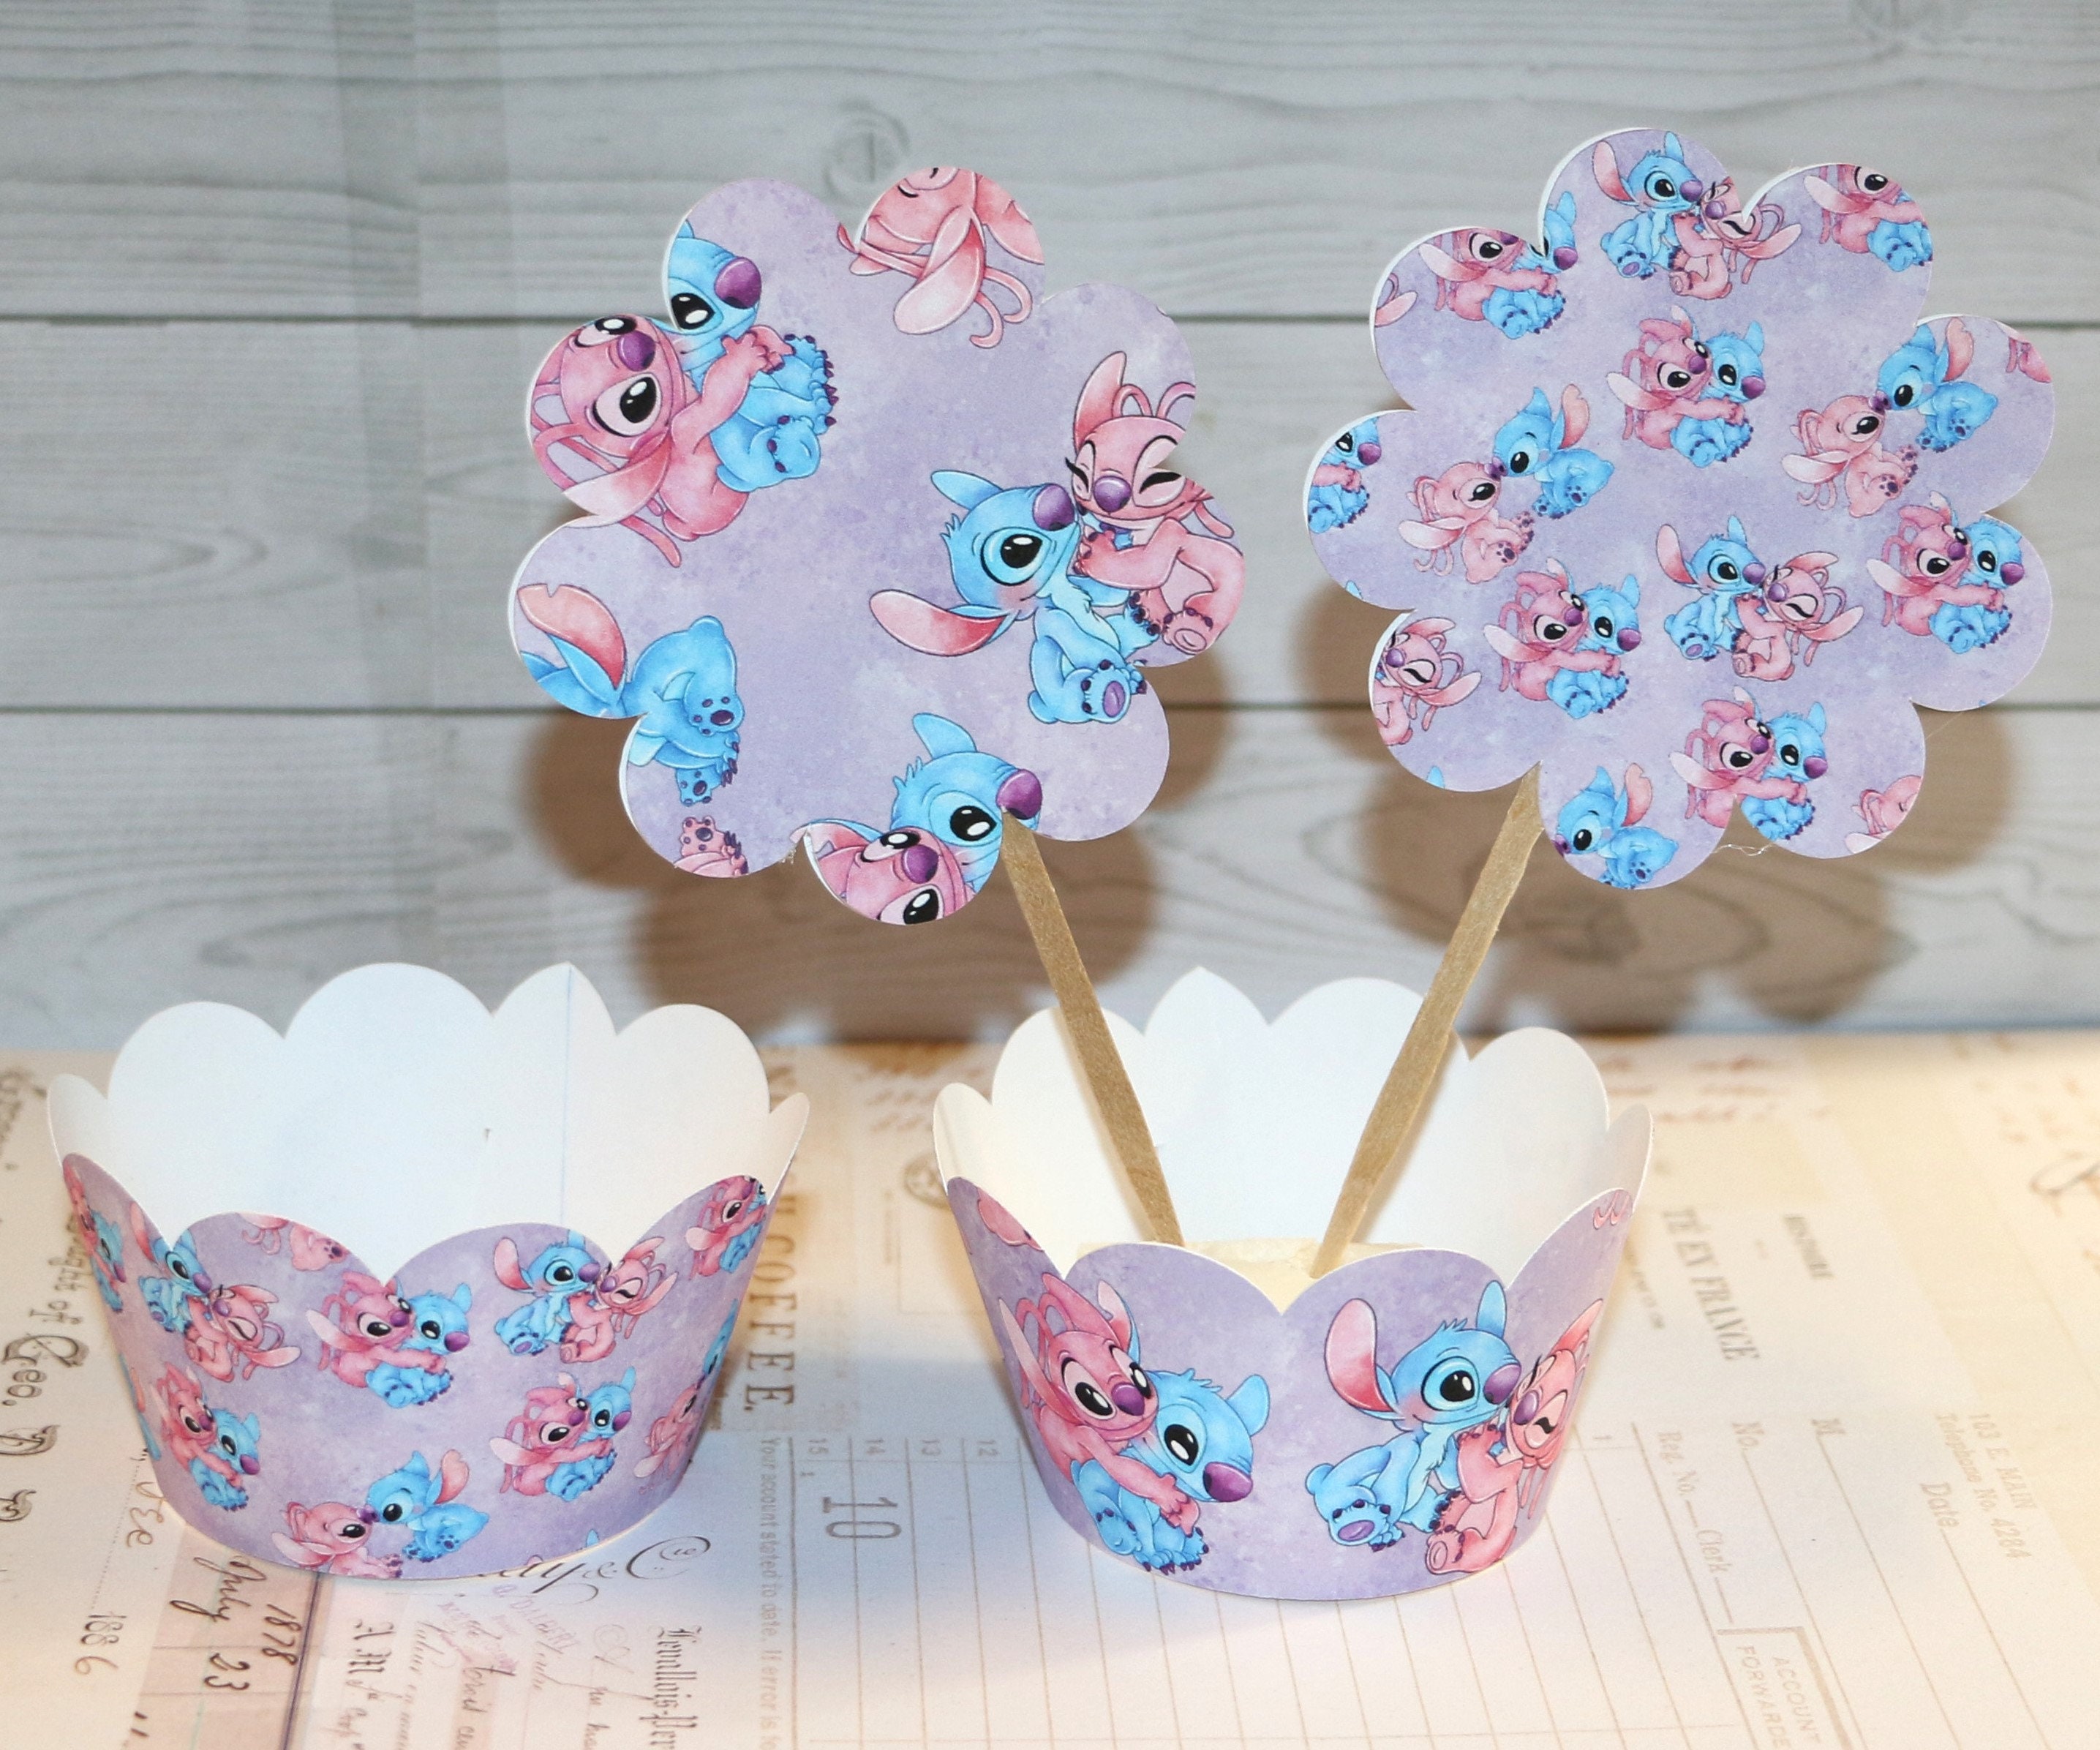 Fairy Angel Cupcake Toppers, Dancing Fairy Cake Decorations, Angel